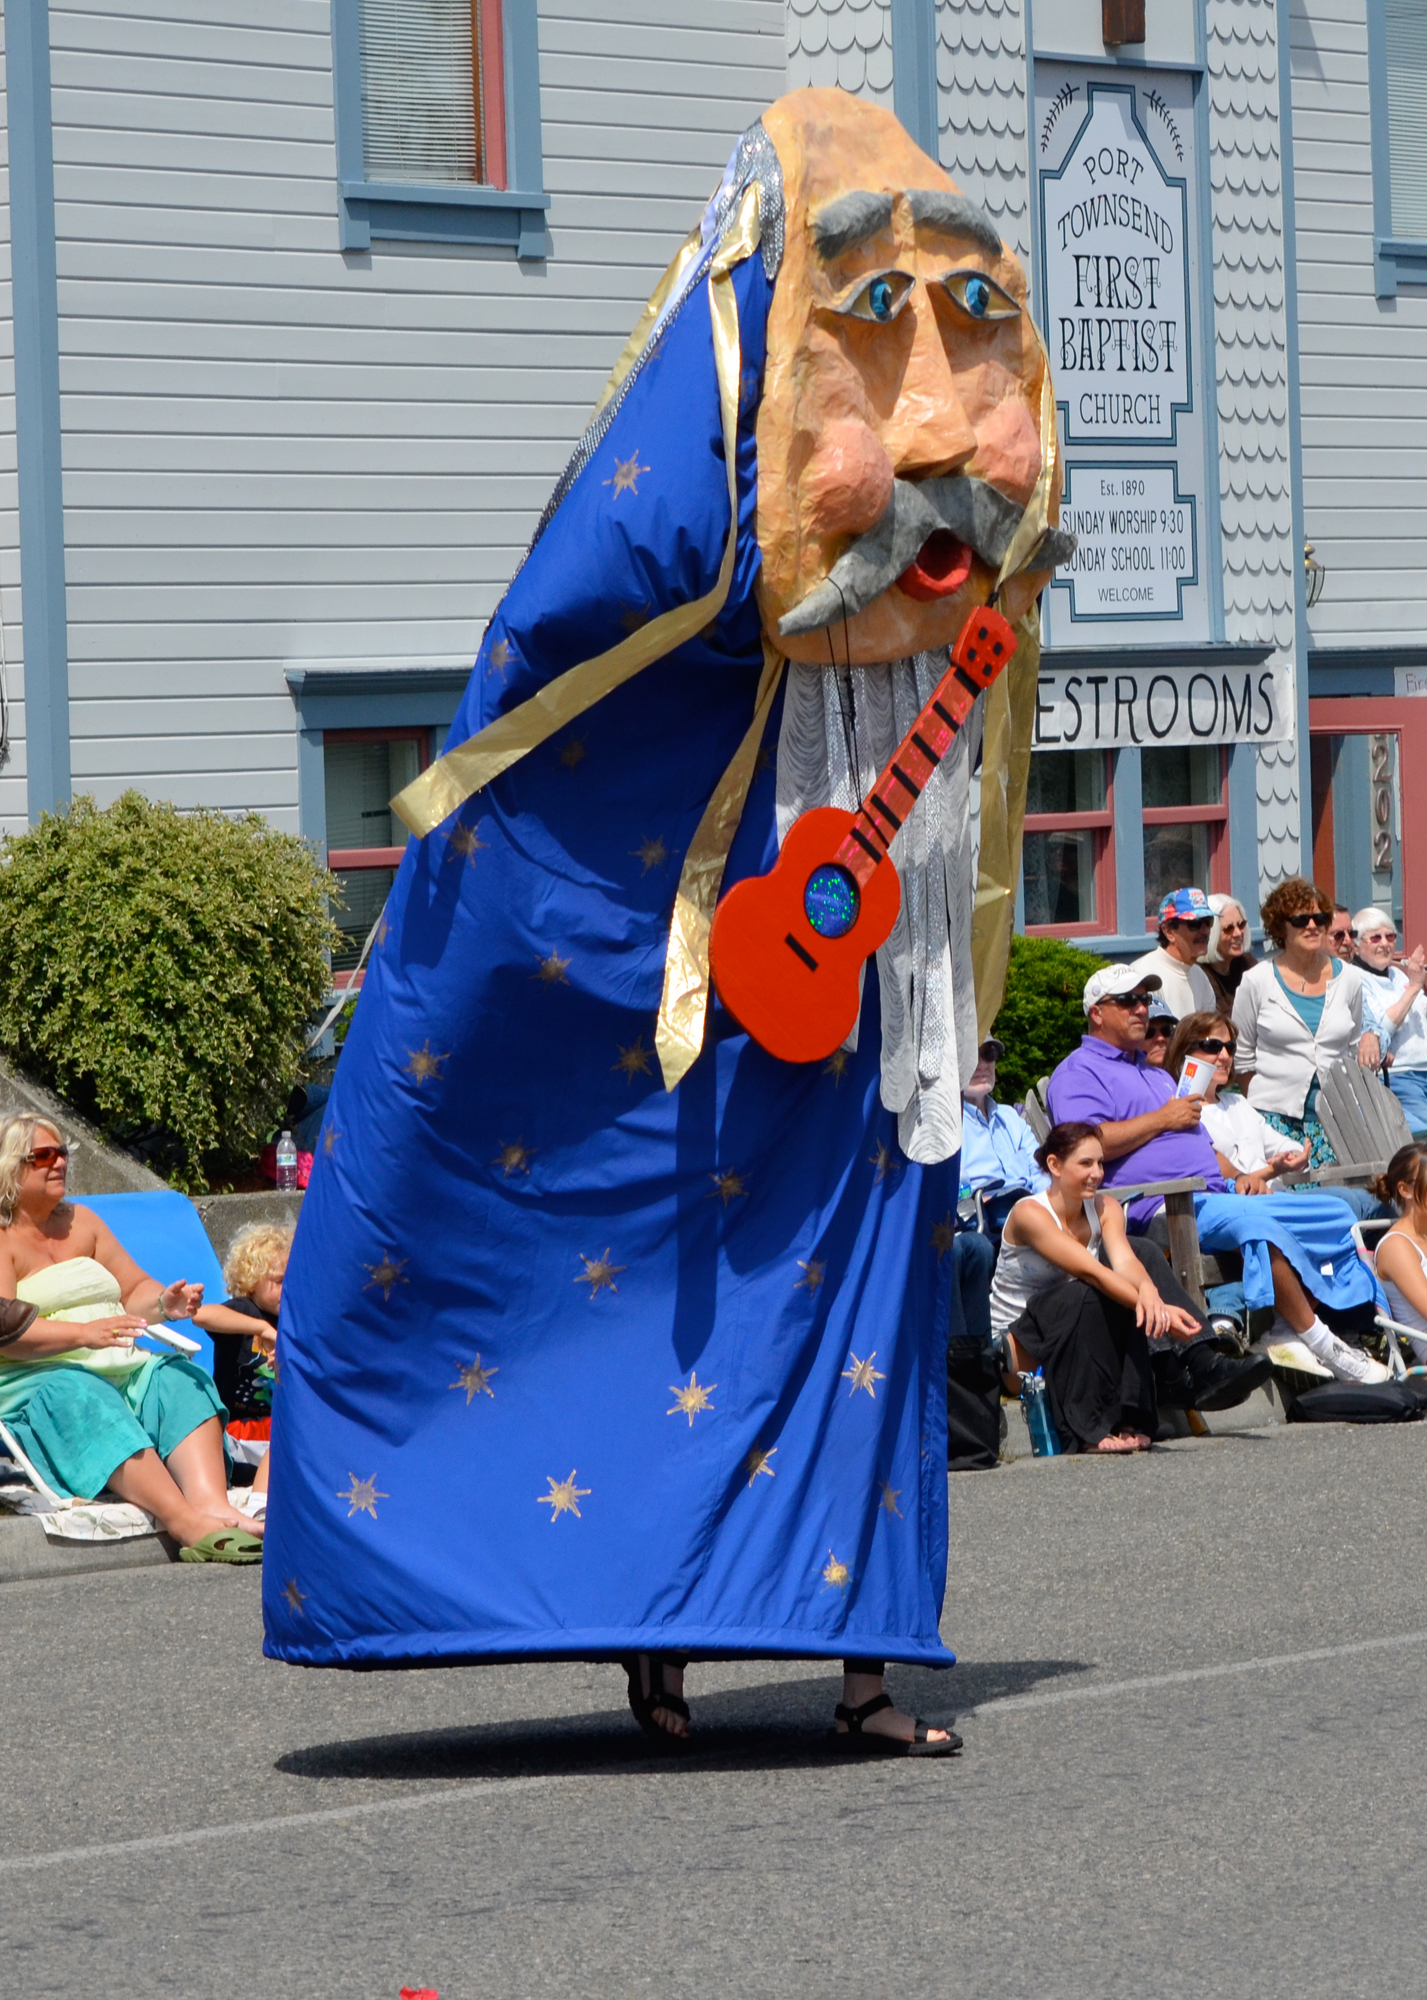 A Ukulele Monster is part of the Ukuleles Unite entry in Saturday's Rhododendron Festival parade in Port Townsend.  -- Photo by Charlie Bermant/Peninsula Daily News